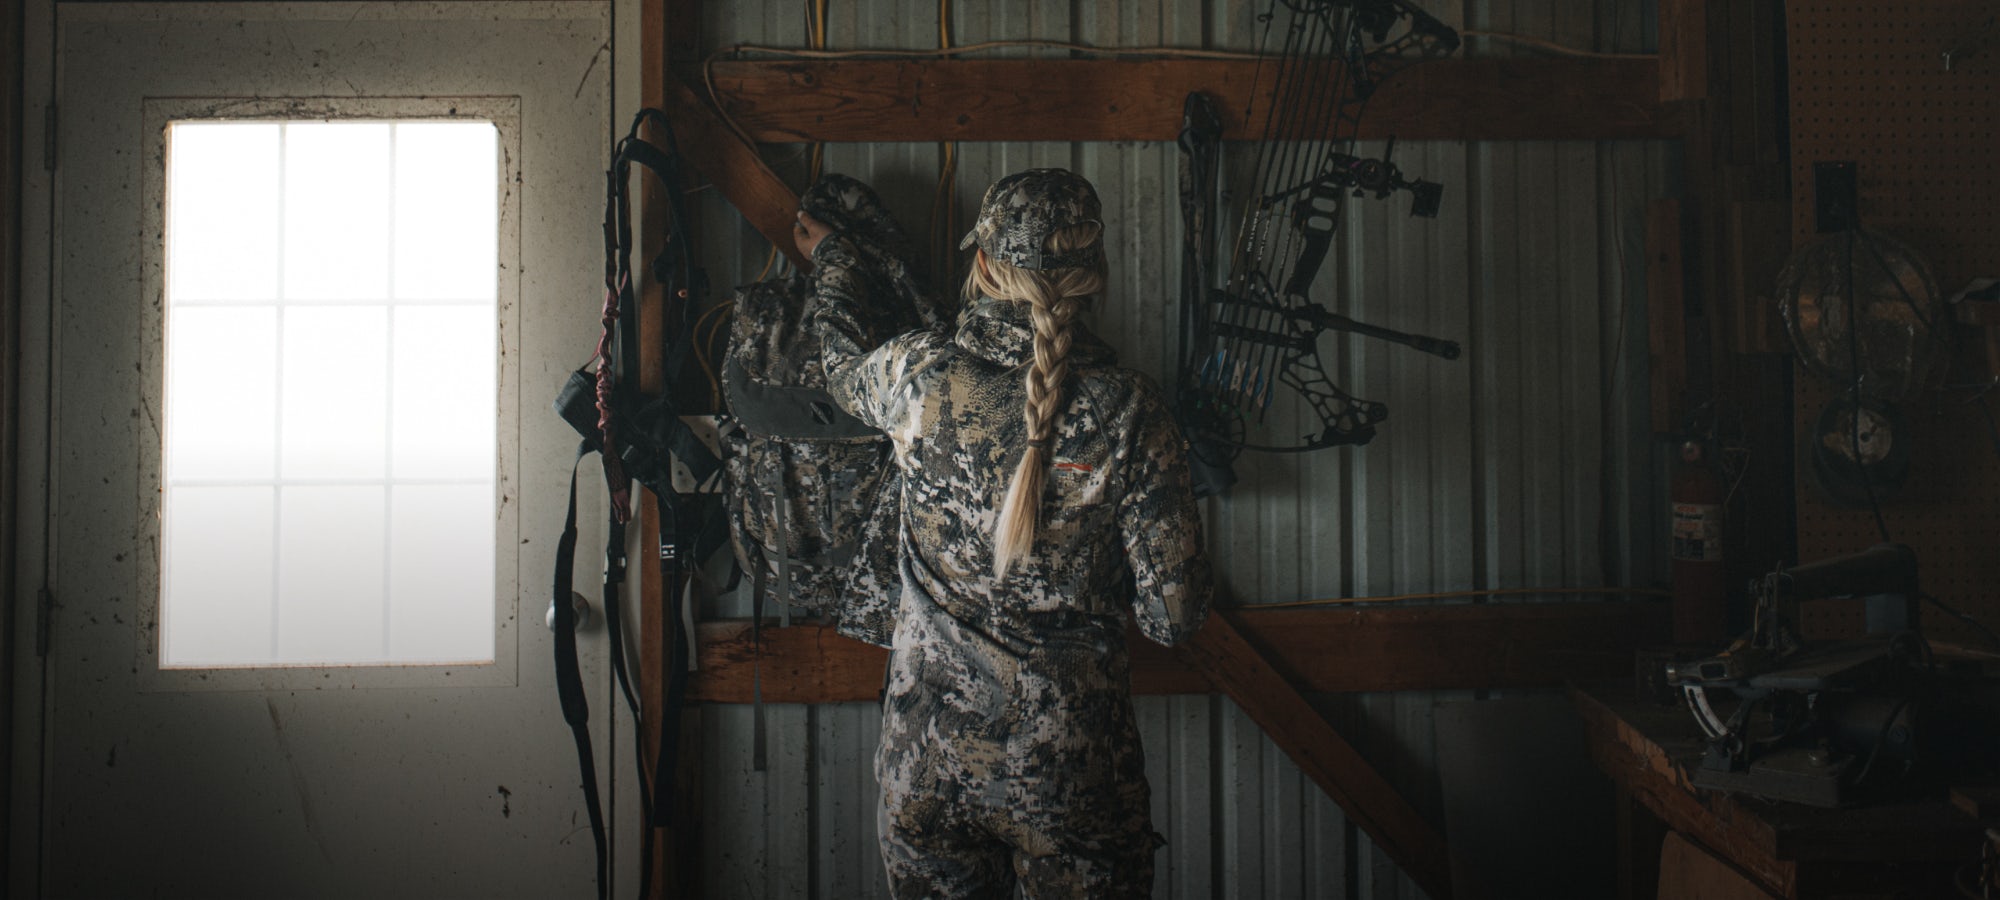 Holiday Gift Ideas for Her | SITKA Gear